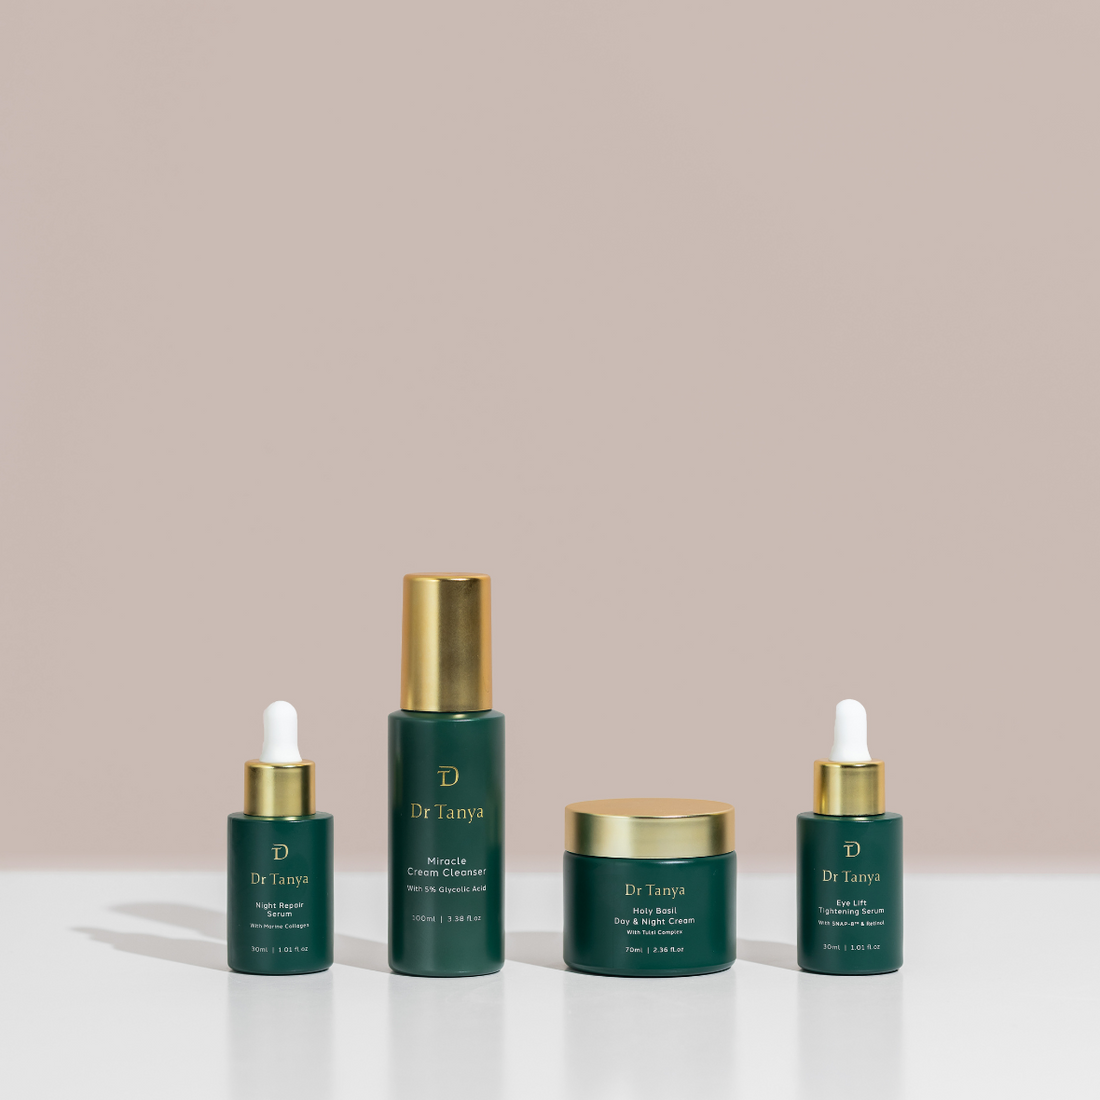 Four dark green skincare product bottles with gold lids lined up in a row against a soft pink backdrop